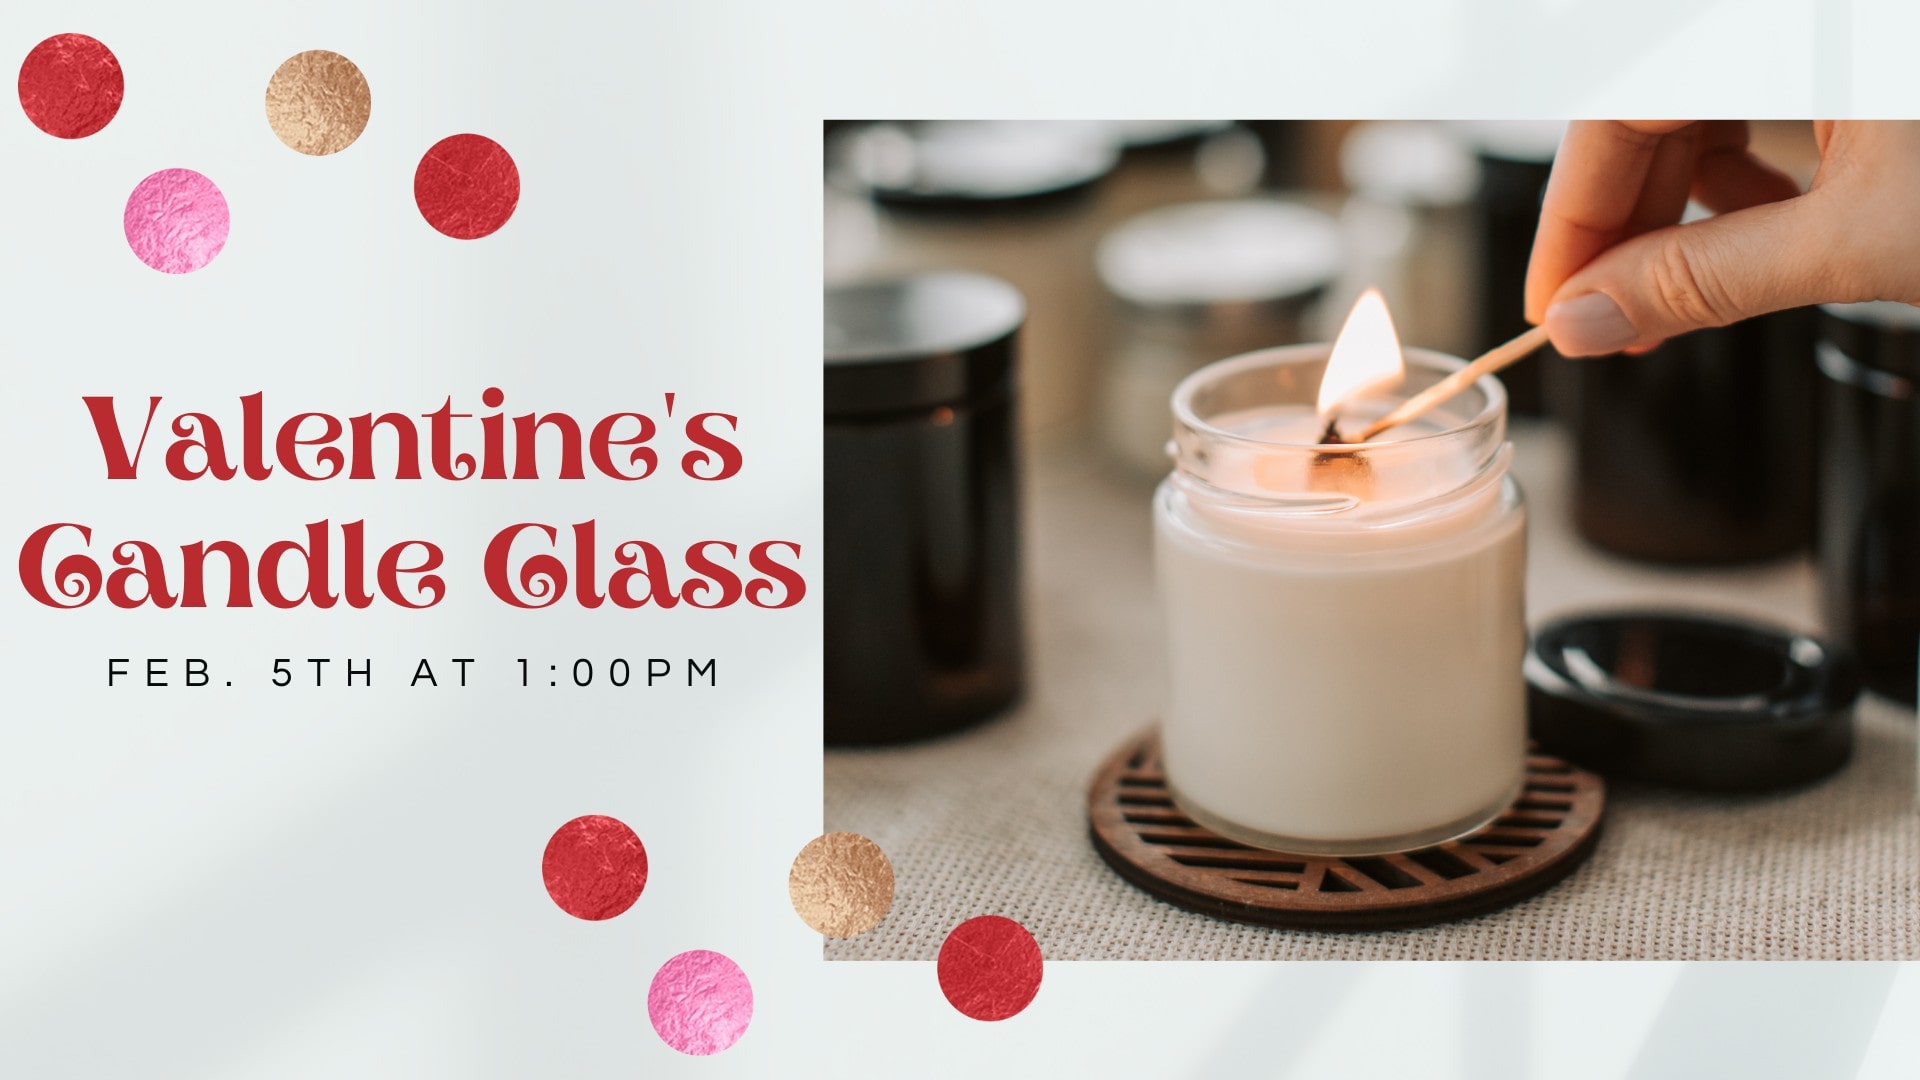 Valentine's Candle Class flyer